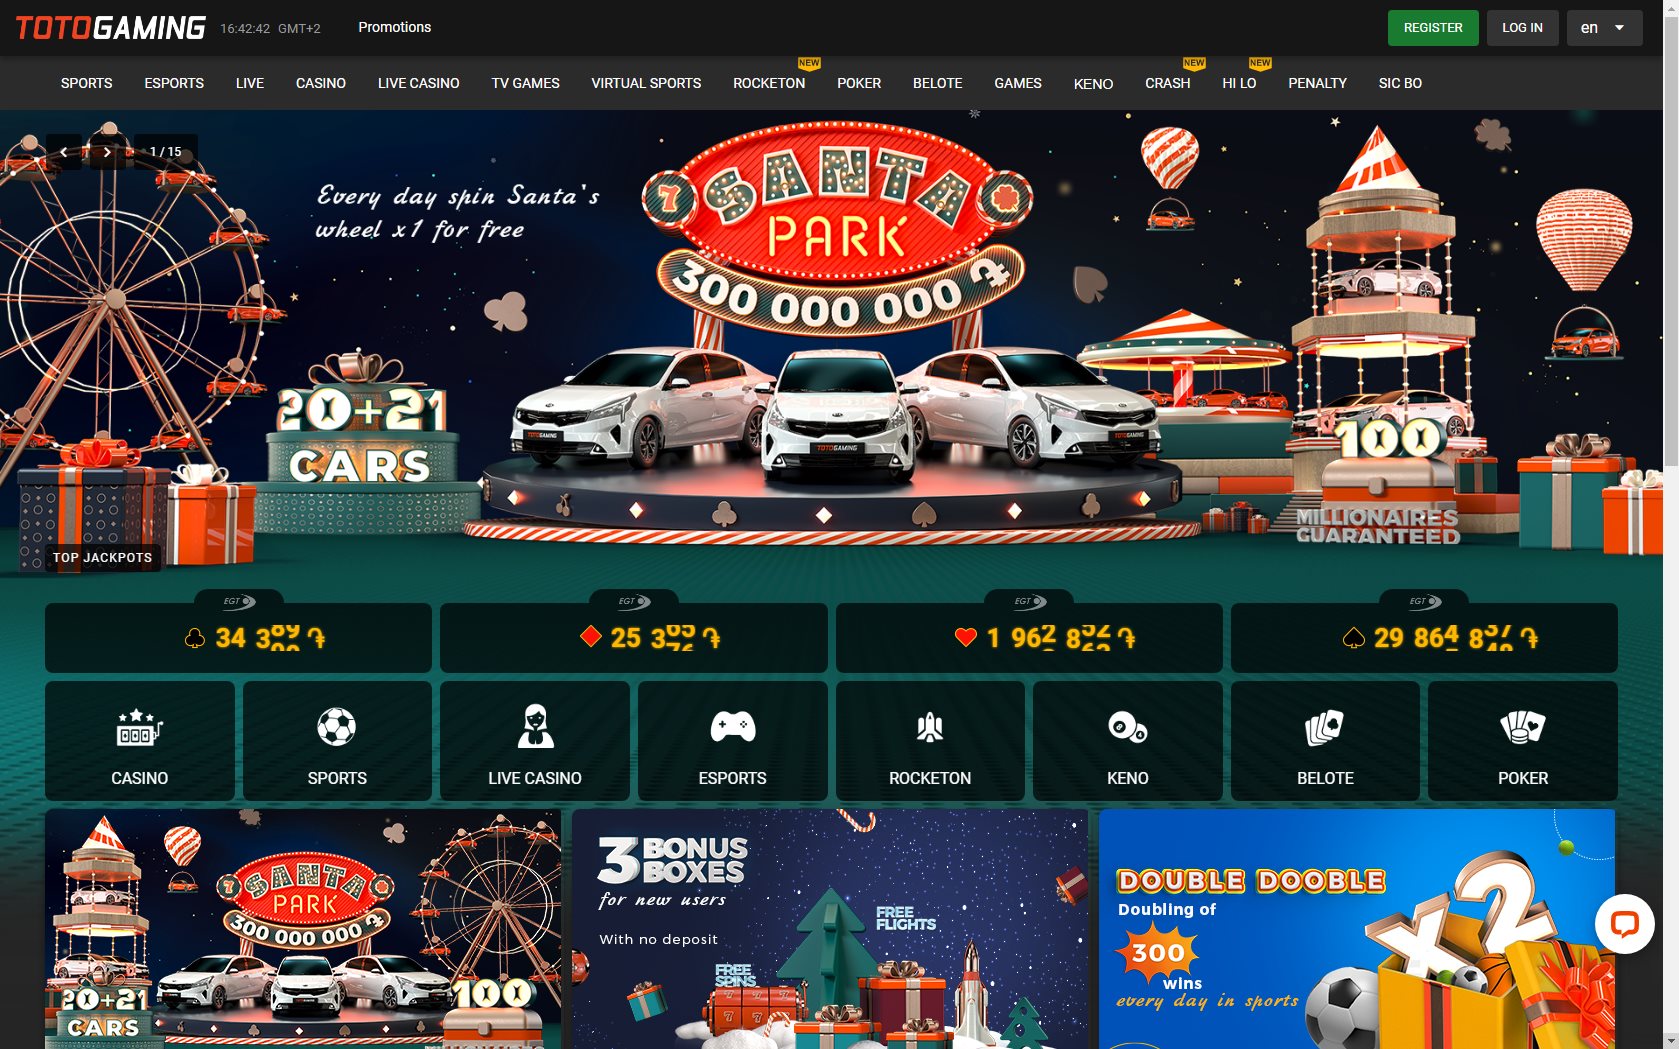 Toto Gaming Casino Review